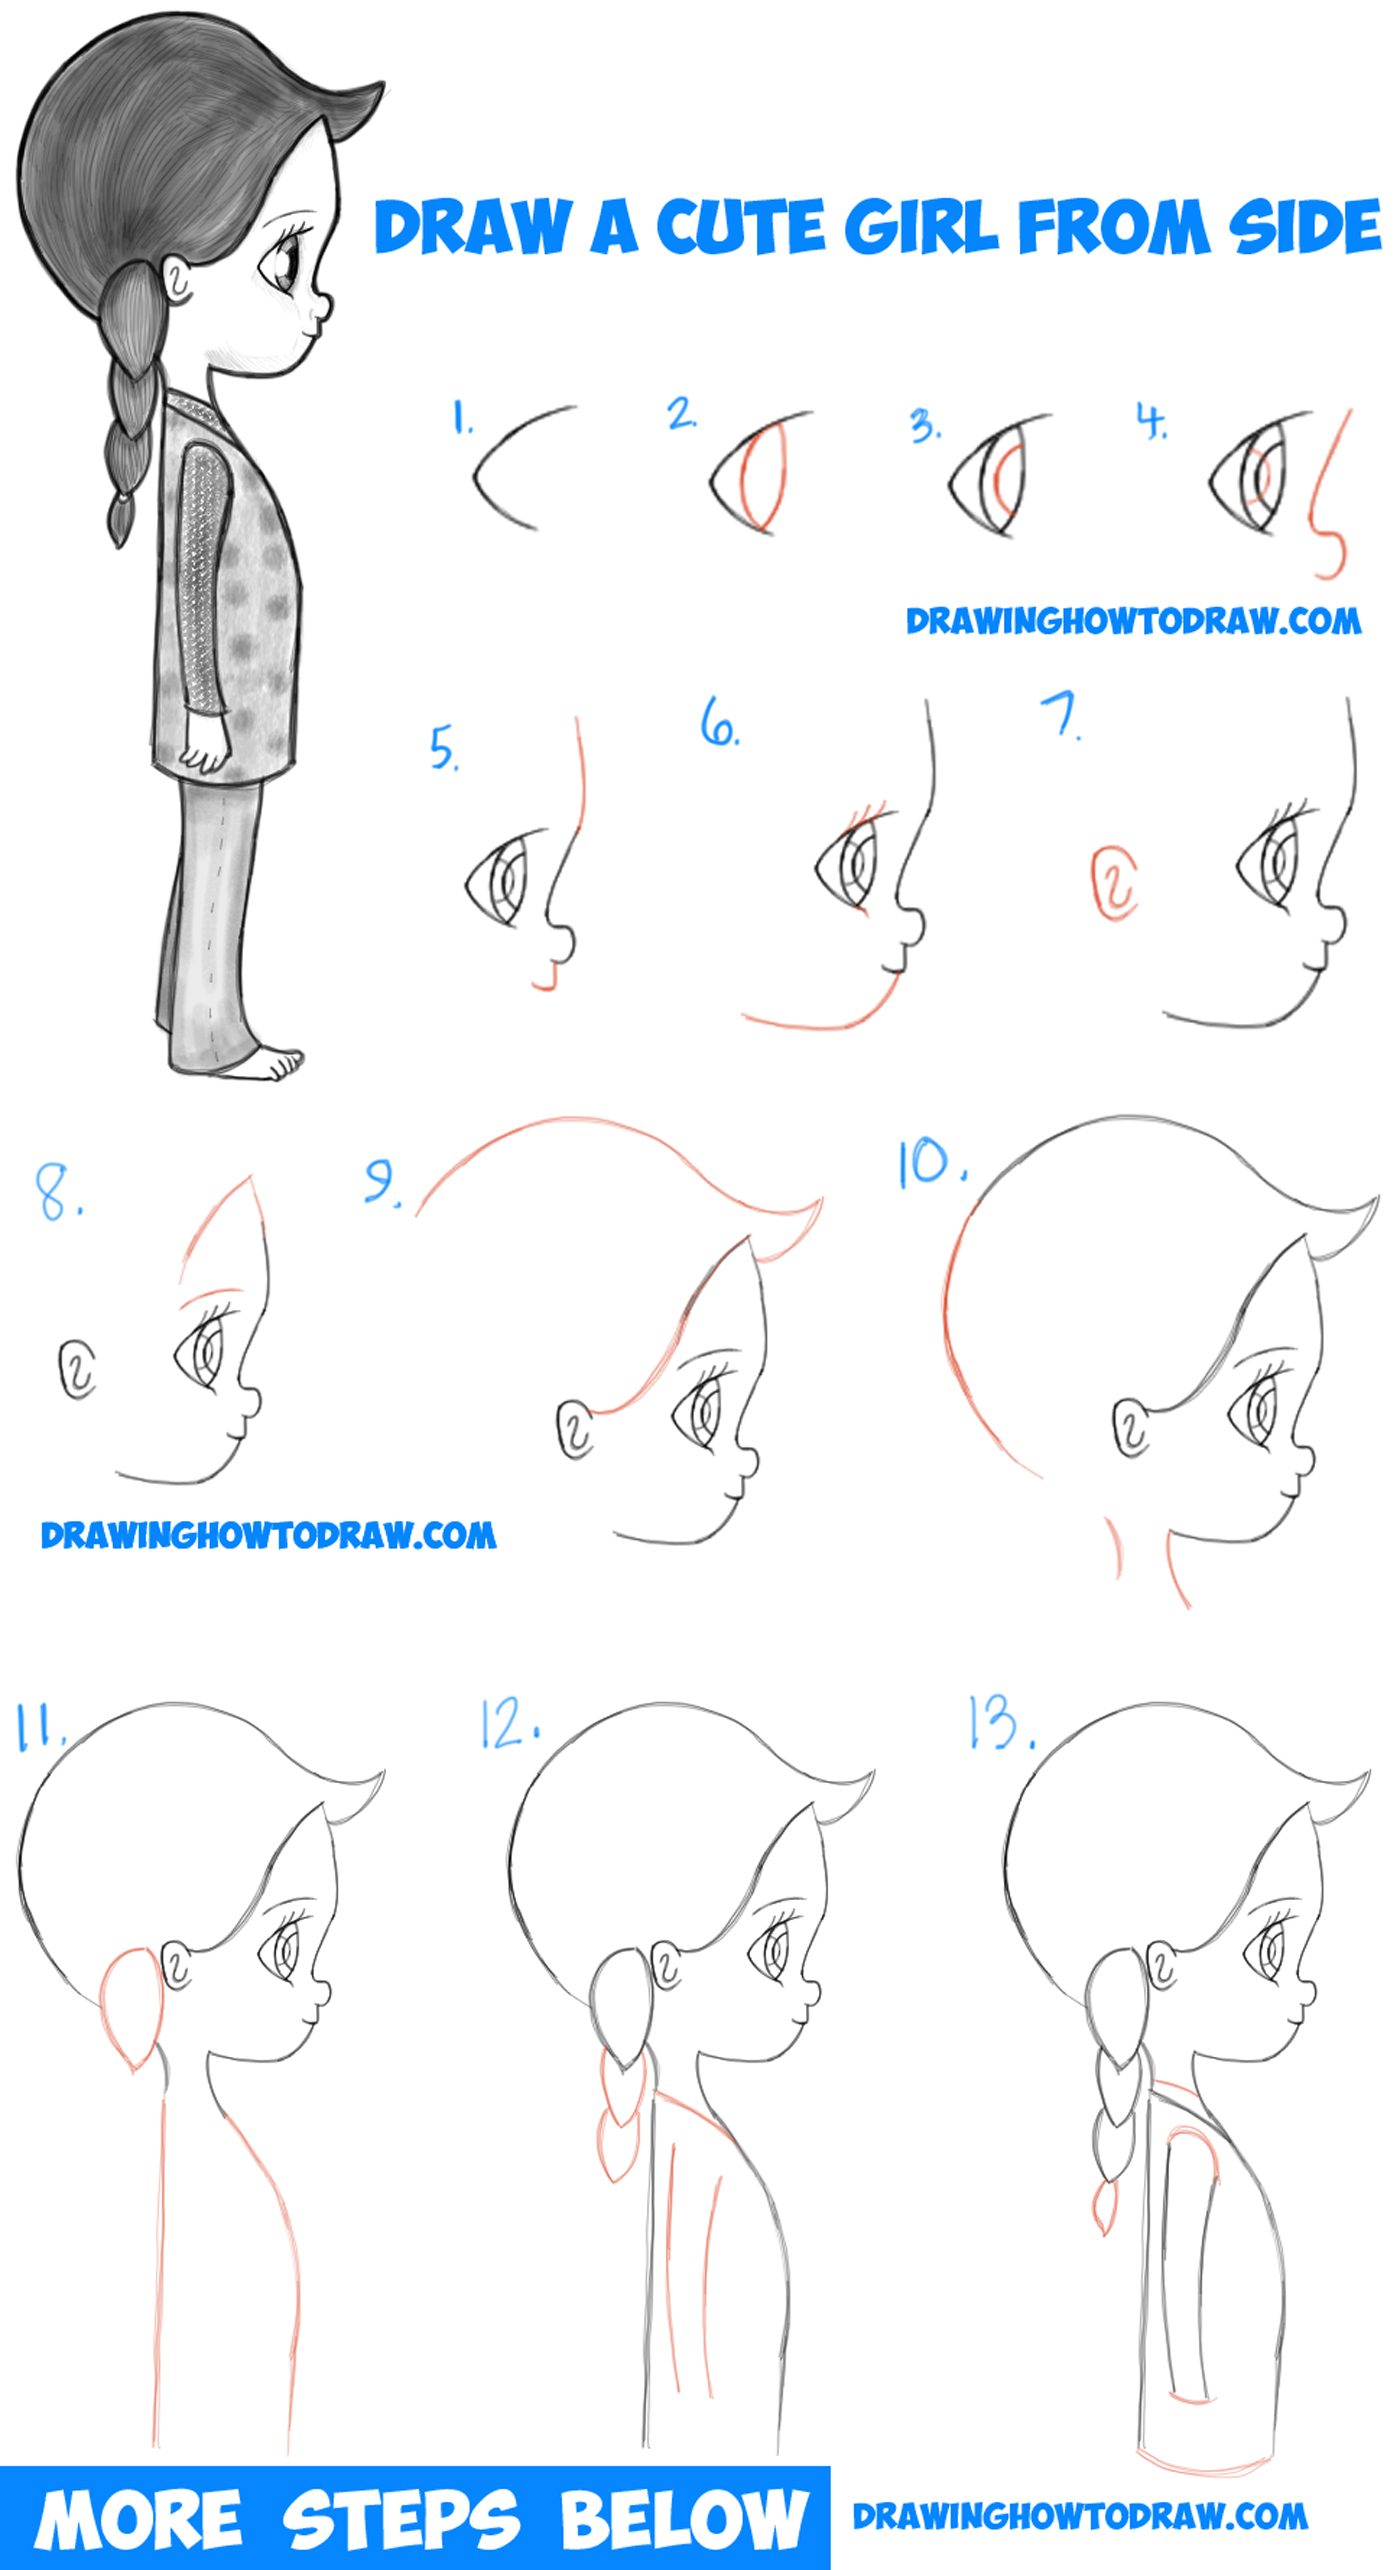 How to Draw a Cute Chibi / Manga / Anime Girl from the Side View Easy